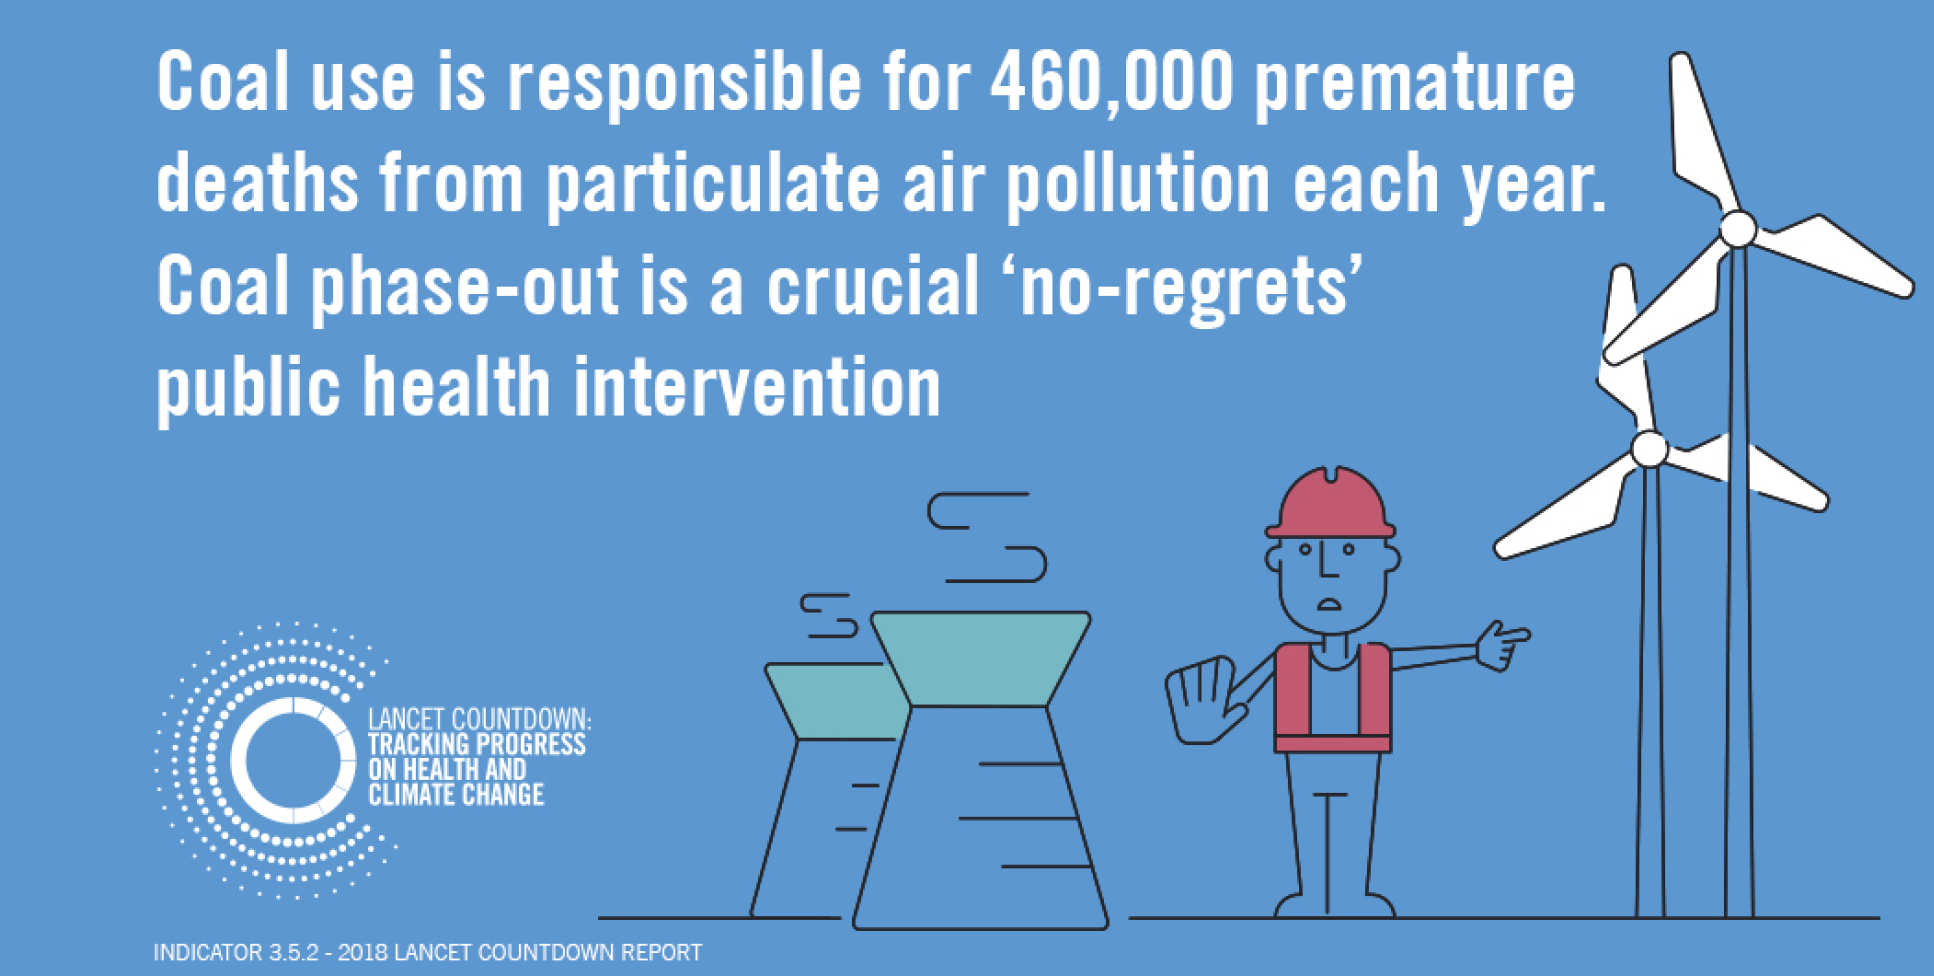 Infographic showing impact of coal on particulate air pollution